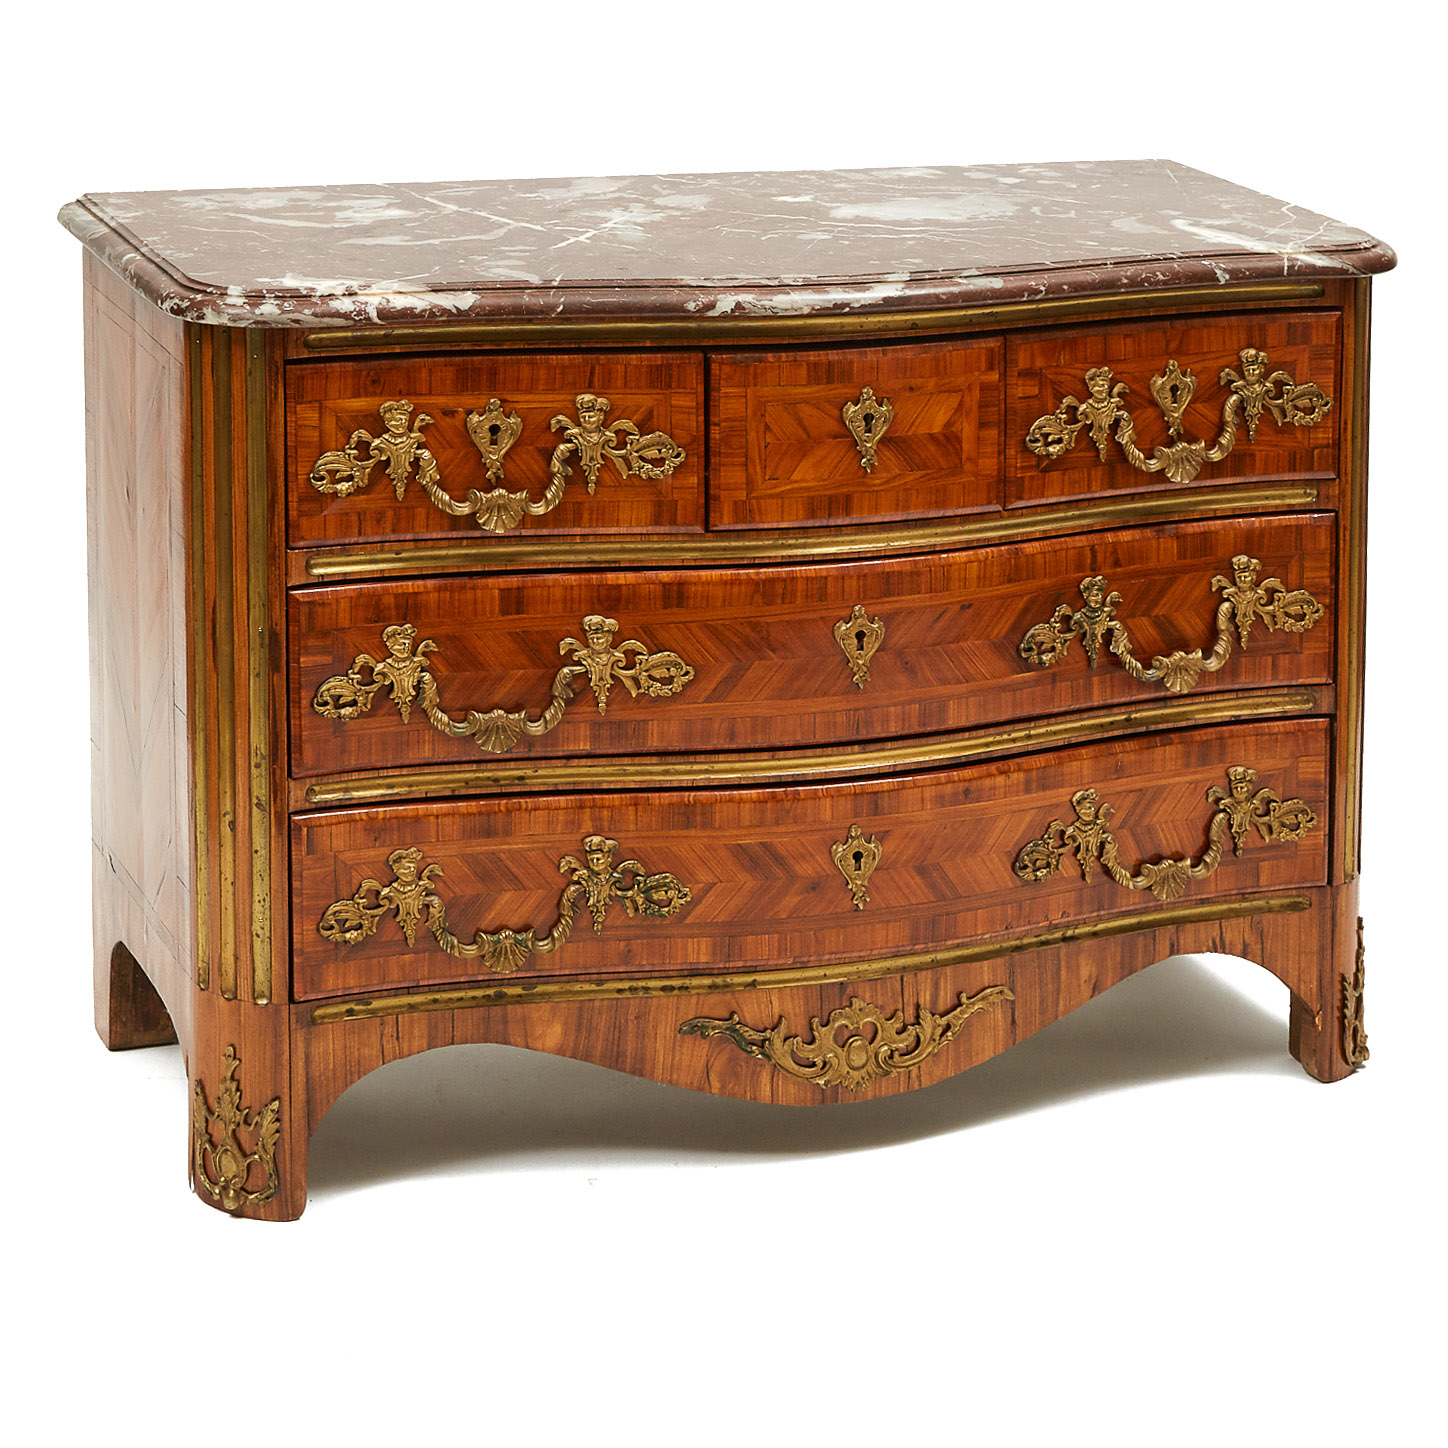 French Regencé Style Ormolu Mounted Tulipwood Parquetry Commode, 19th century